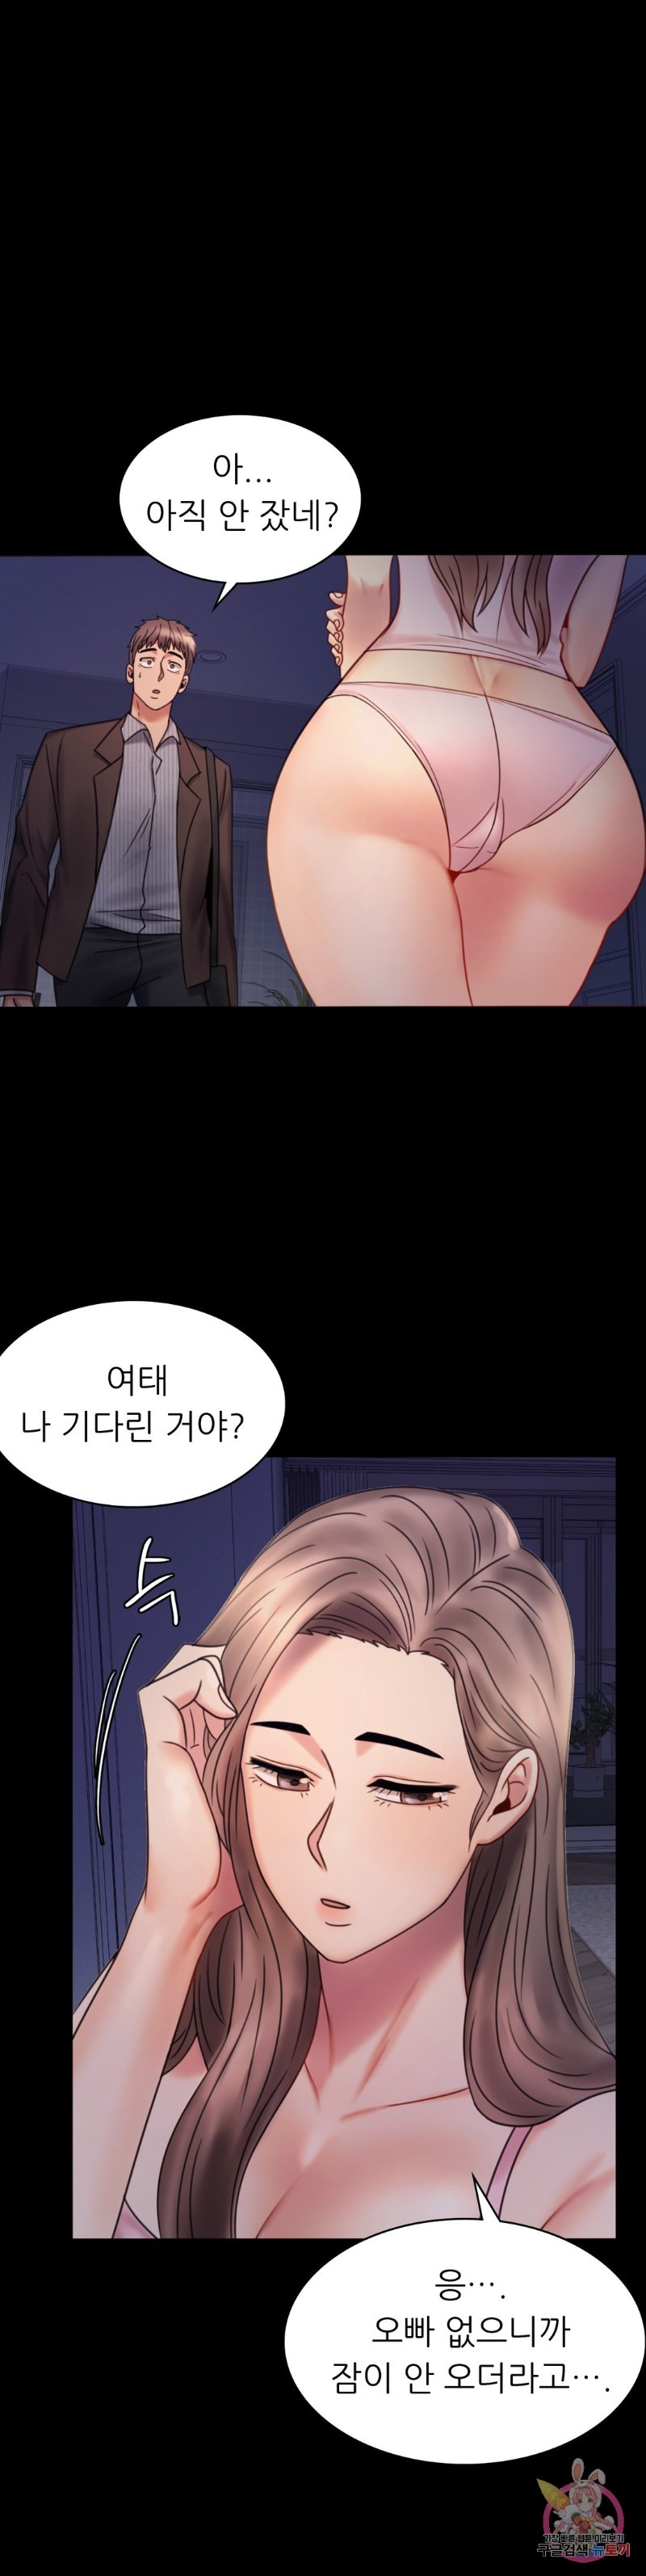 illicitlove Raw - Chapter 6 Page 3